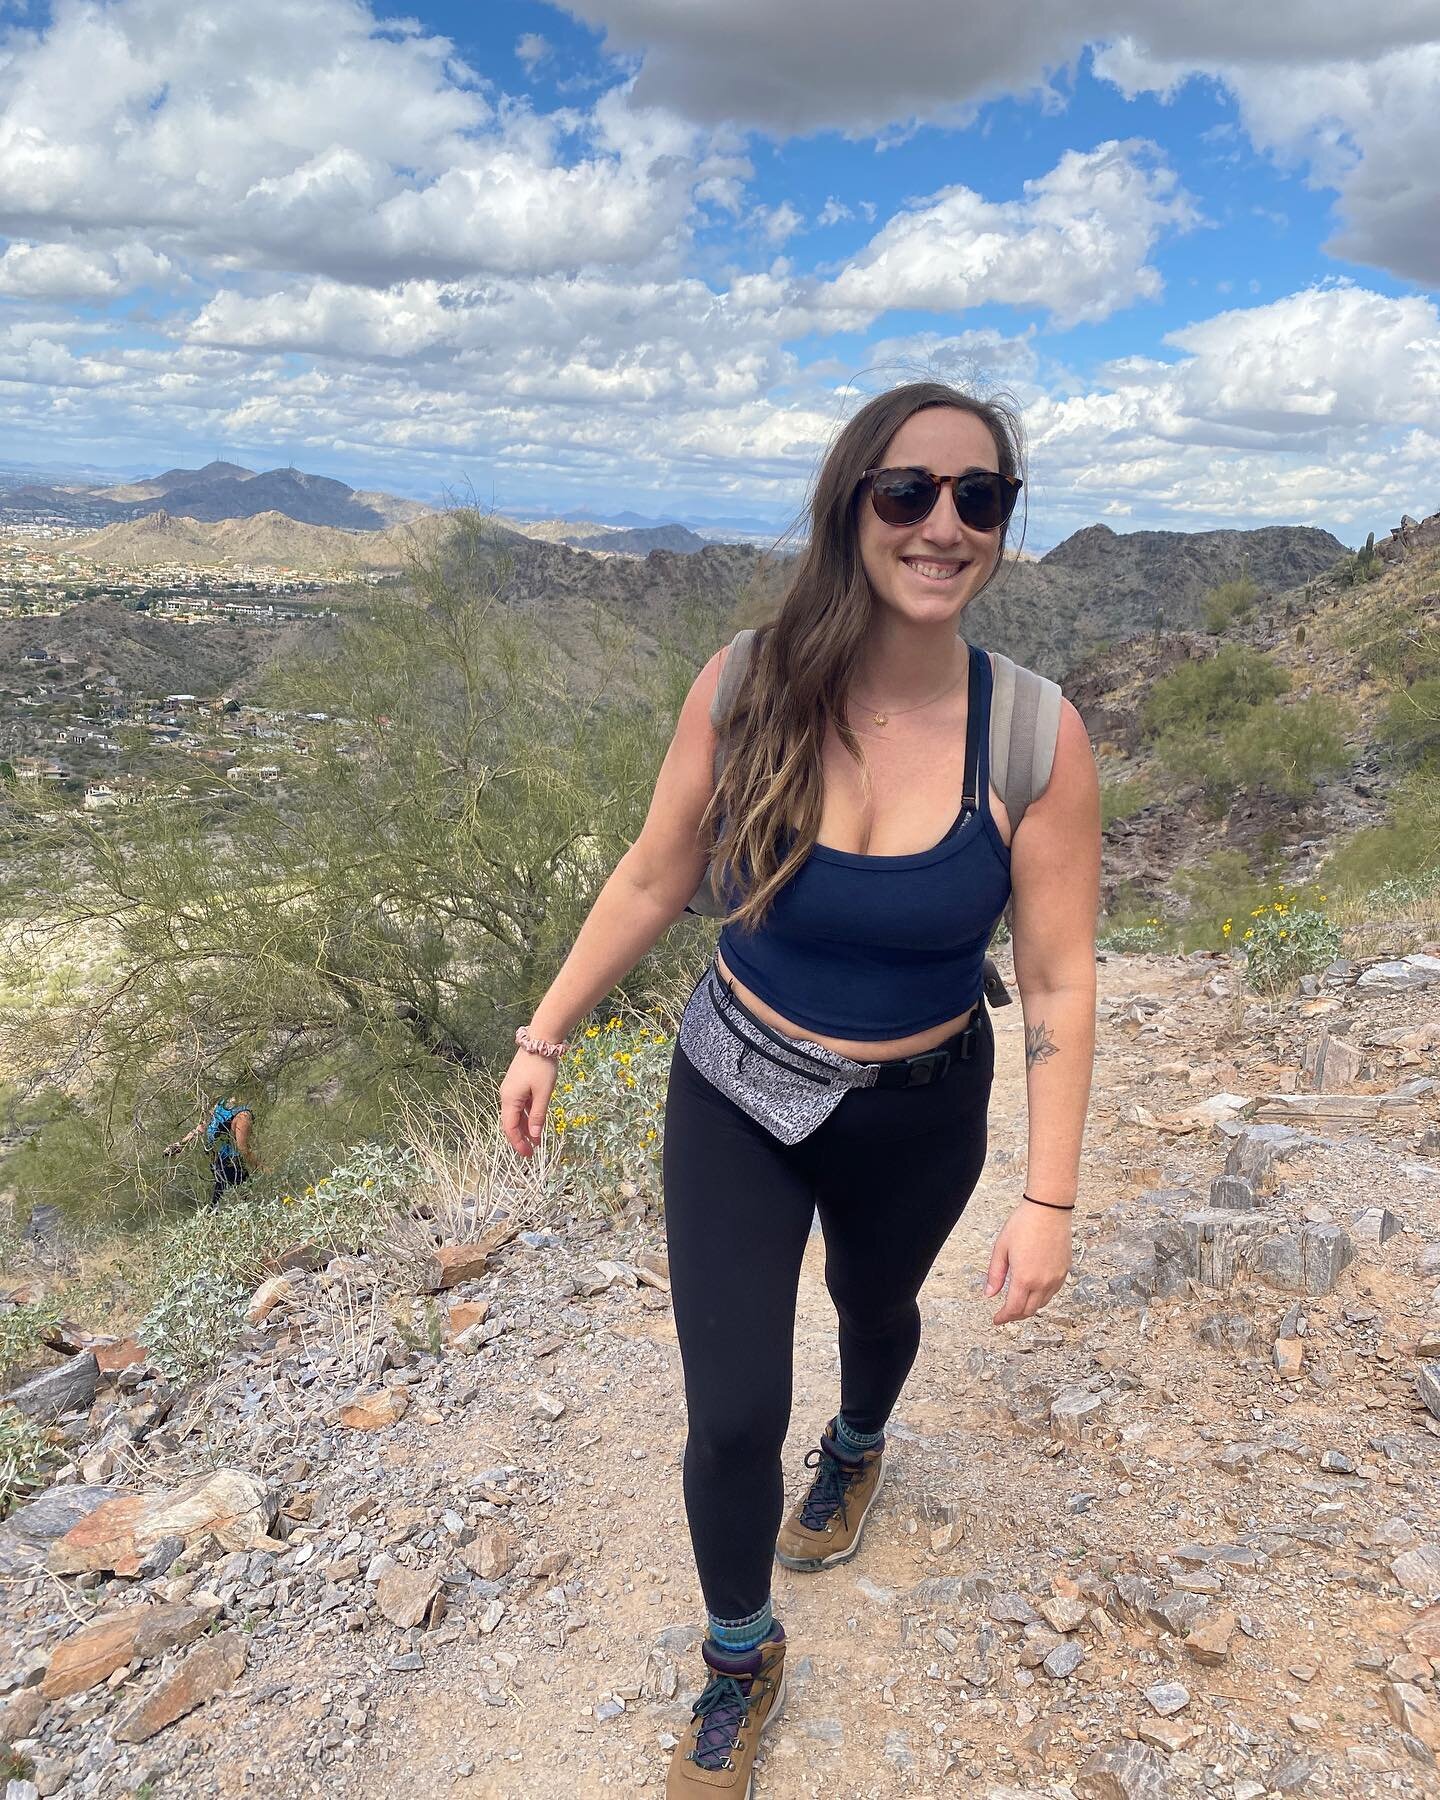 A much needed weekend away filled with mountains, cacti and palm trees @stephaniekorkigian 🏔 🌵 🌴 

.
.
.
#travel #adventure #arizona🌵 #nature #cacti #hikingadventures #girlslovetravel #scottsdale